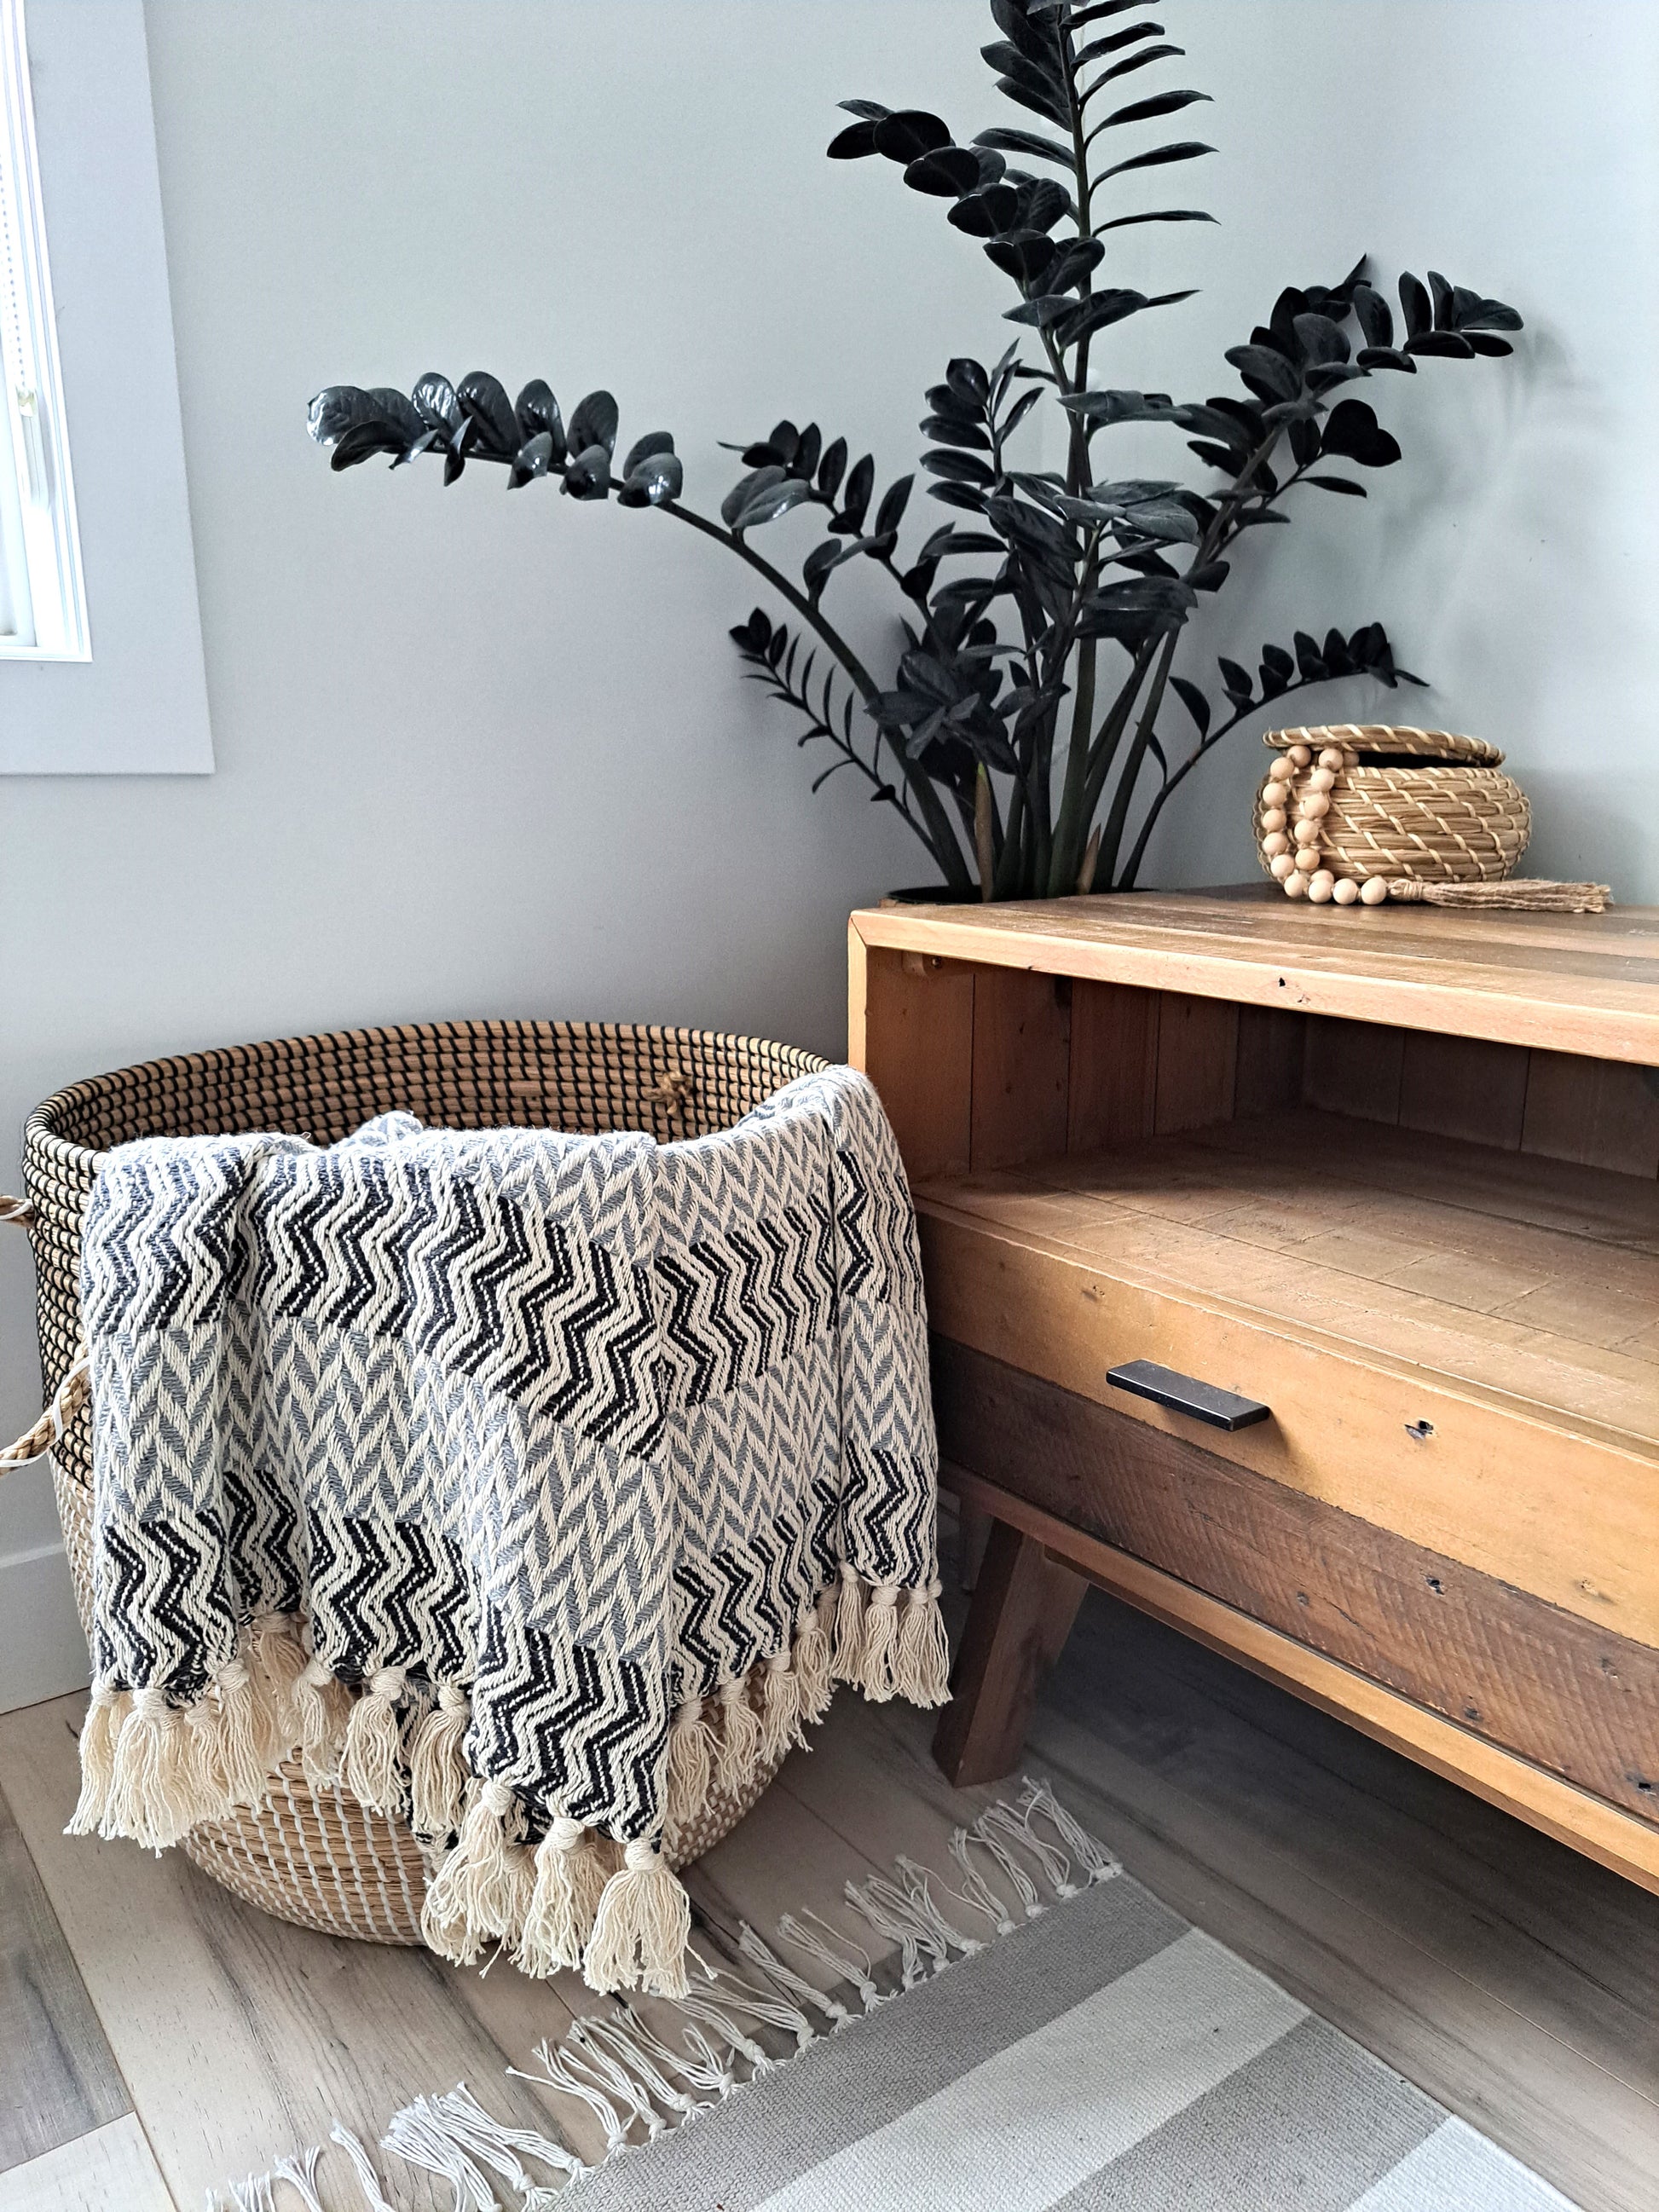 An incredibly soft and warm throw, this handwoven 100% cotton blanket adds so much texture to the space. Made with a chevron pattern, the neutral beige, grey, and subtle blue provide lots of visual interest by providing a bold, yet calming overall look. Truly an artisanal piece, and one that is sure to impress!